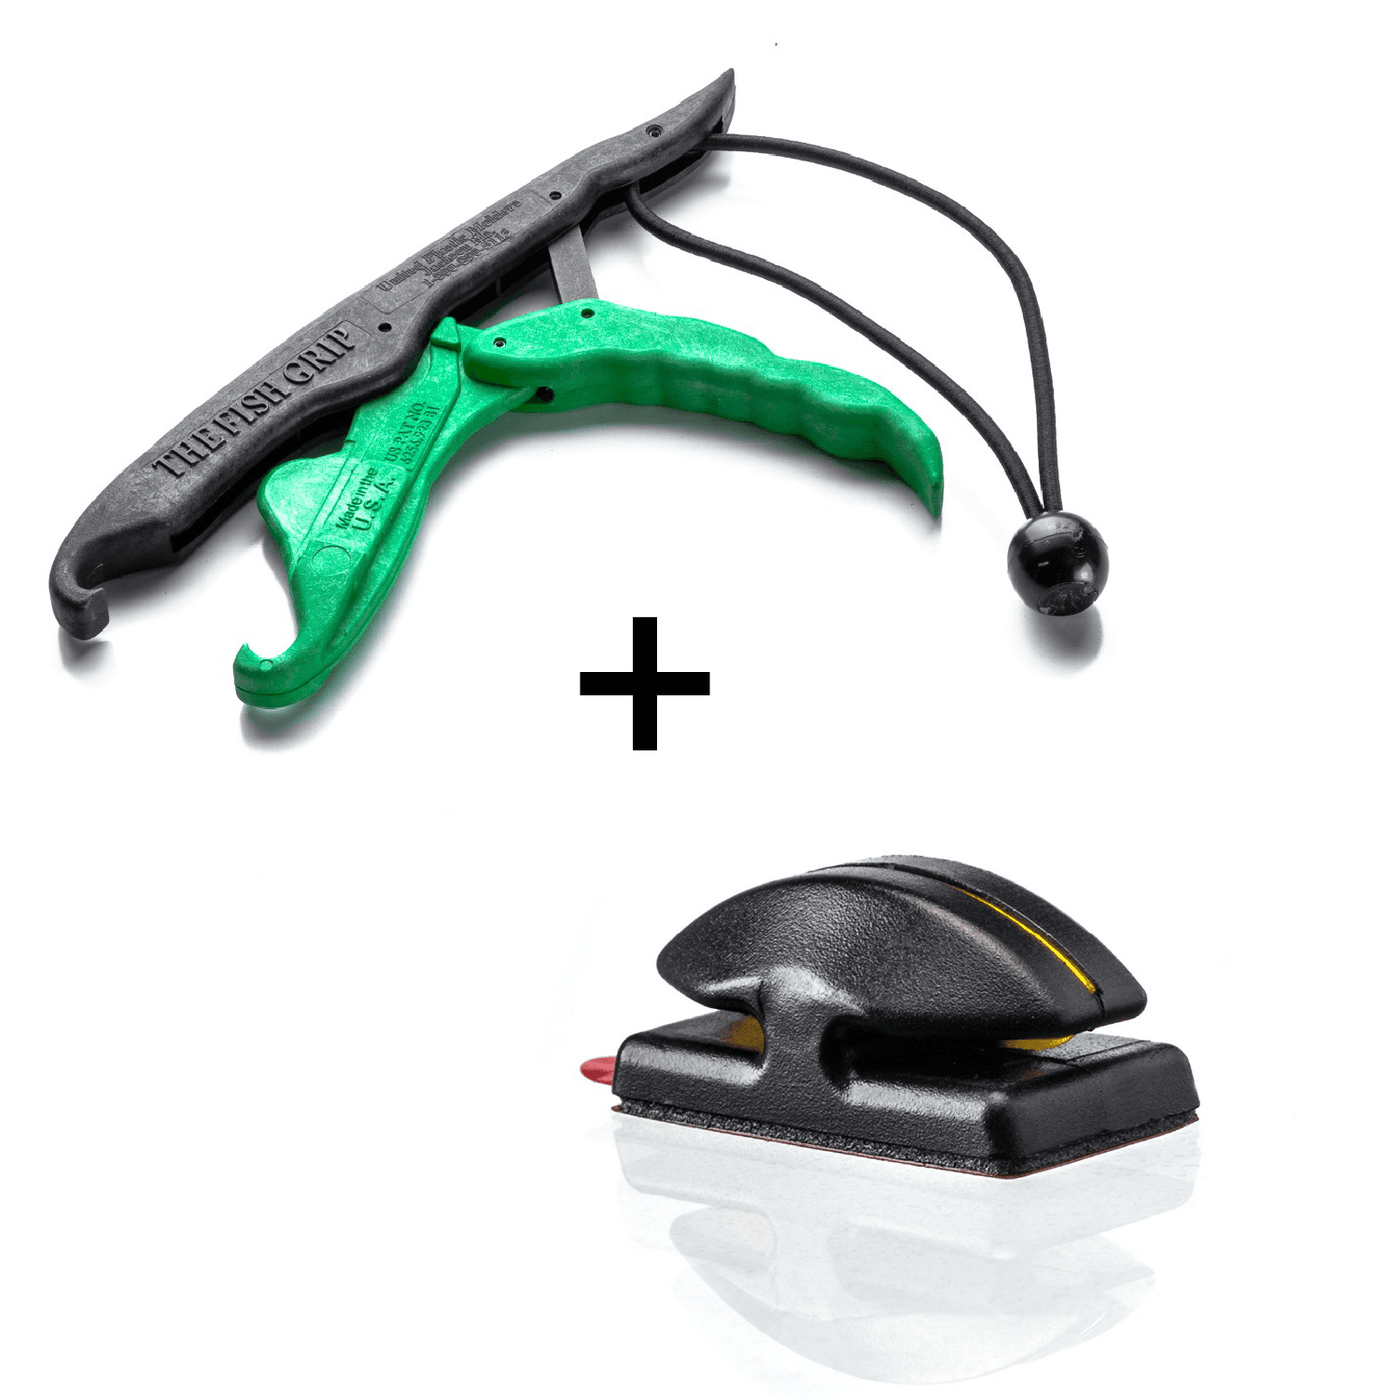 COMBO DEAL - "Limited Edition" Line Cutterz Flat Mount + Lunker Tamers by The Fish Grip Combo Cutter Line Cutterz Black/Green 